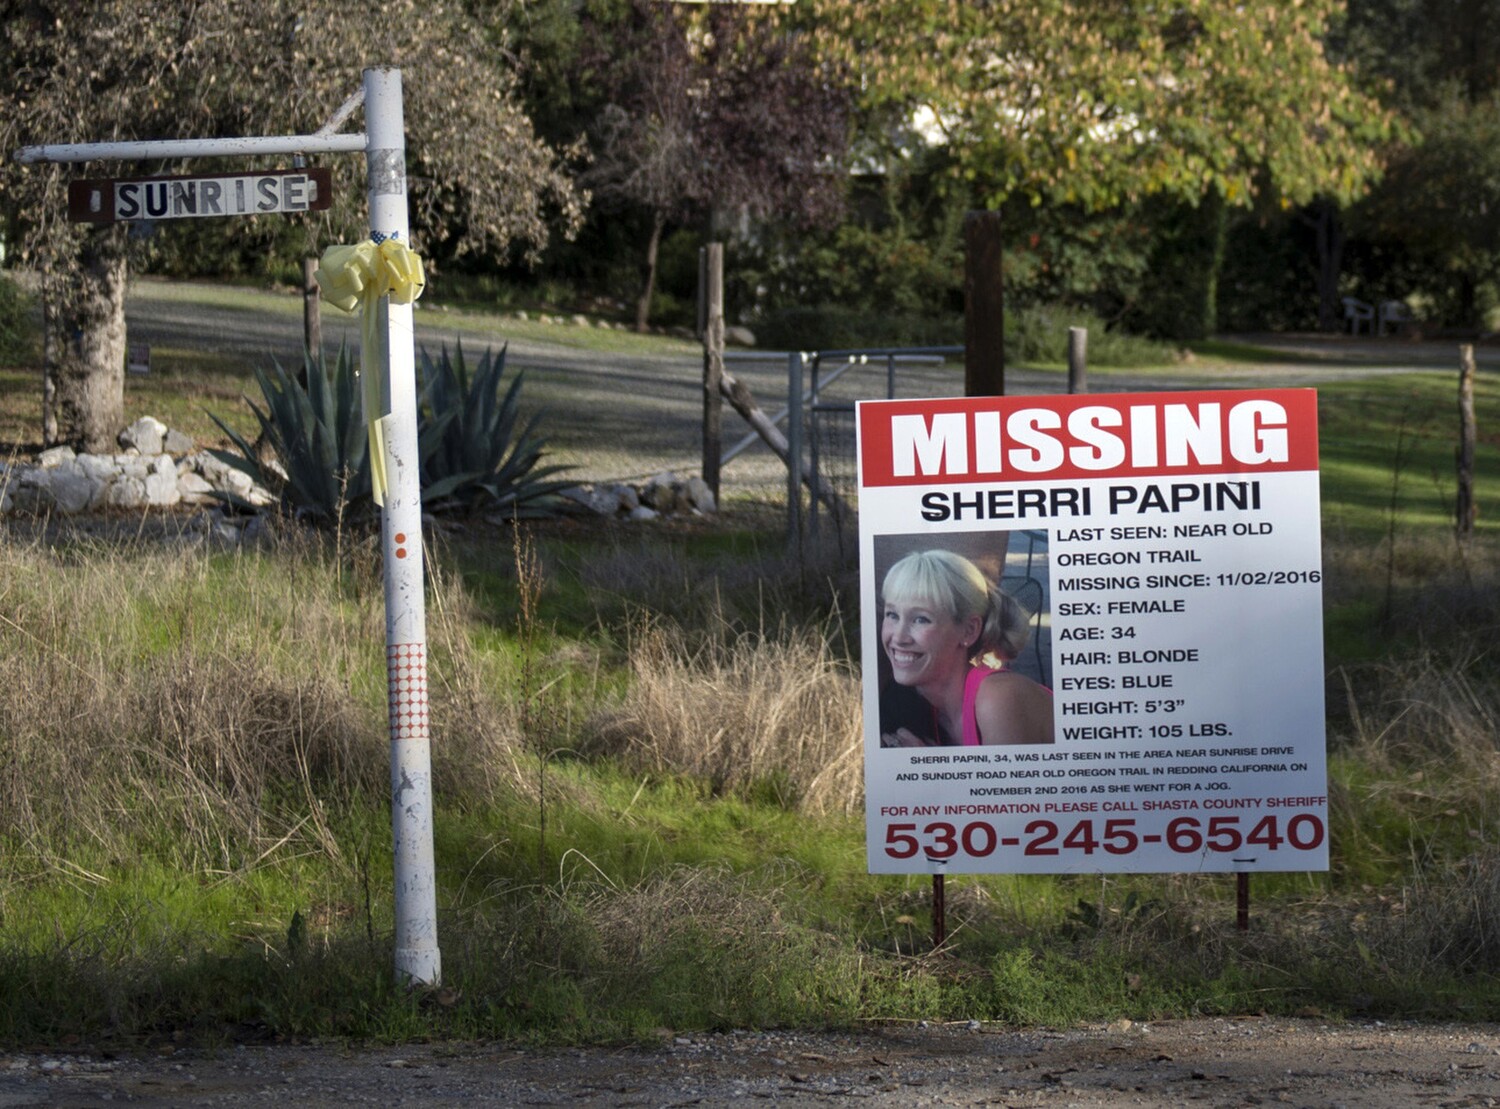 Sherri Papini's kidnapping stoked racial division and fear. Investigators say it was all a lie